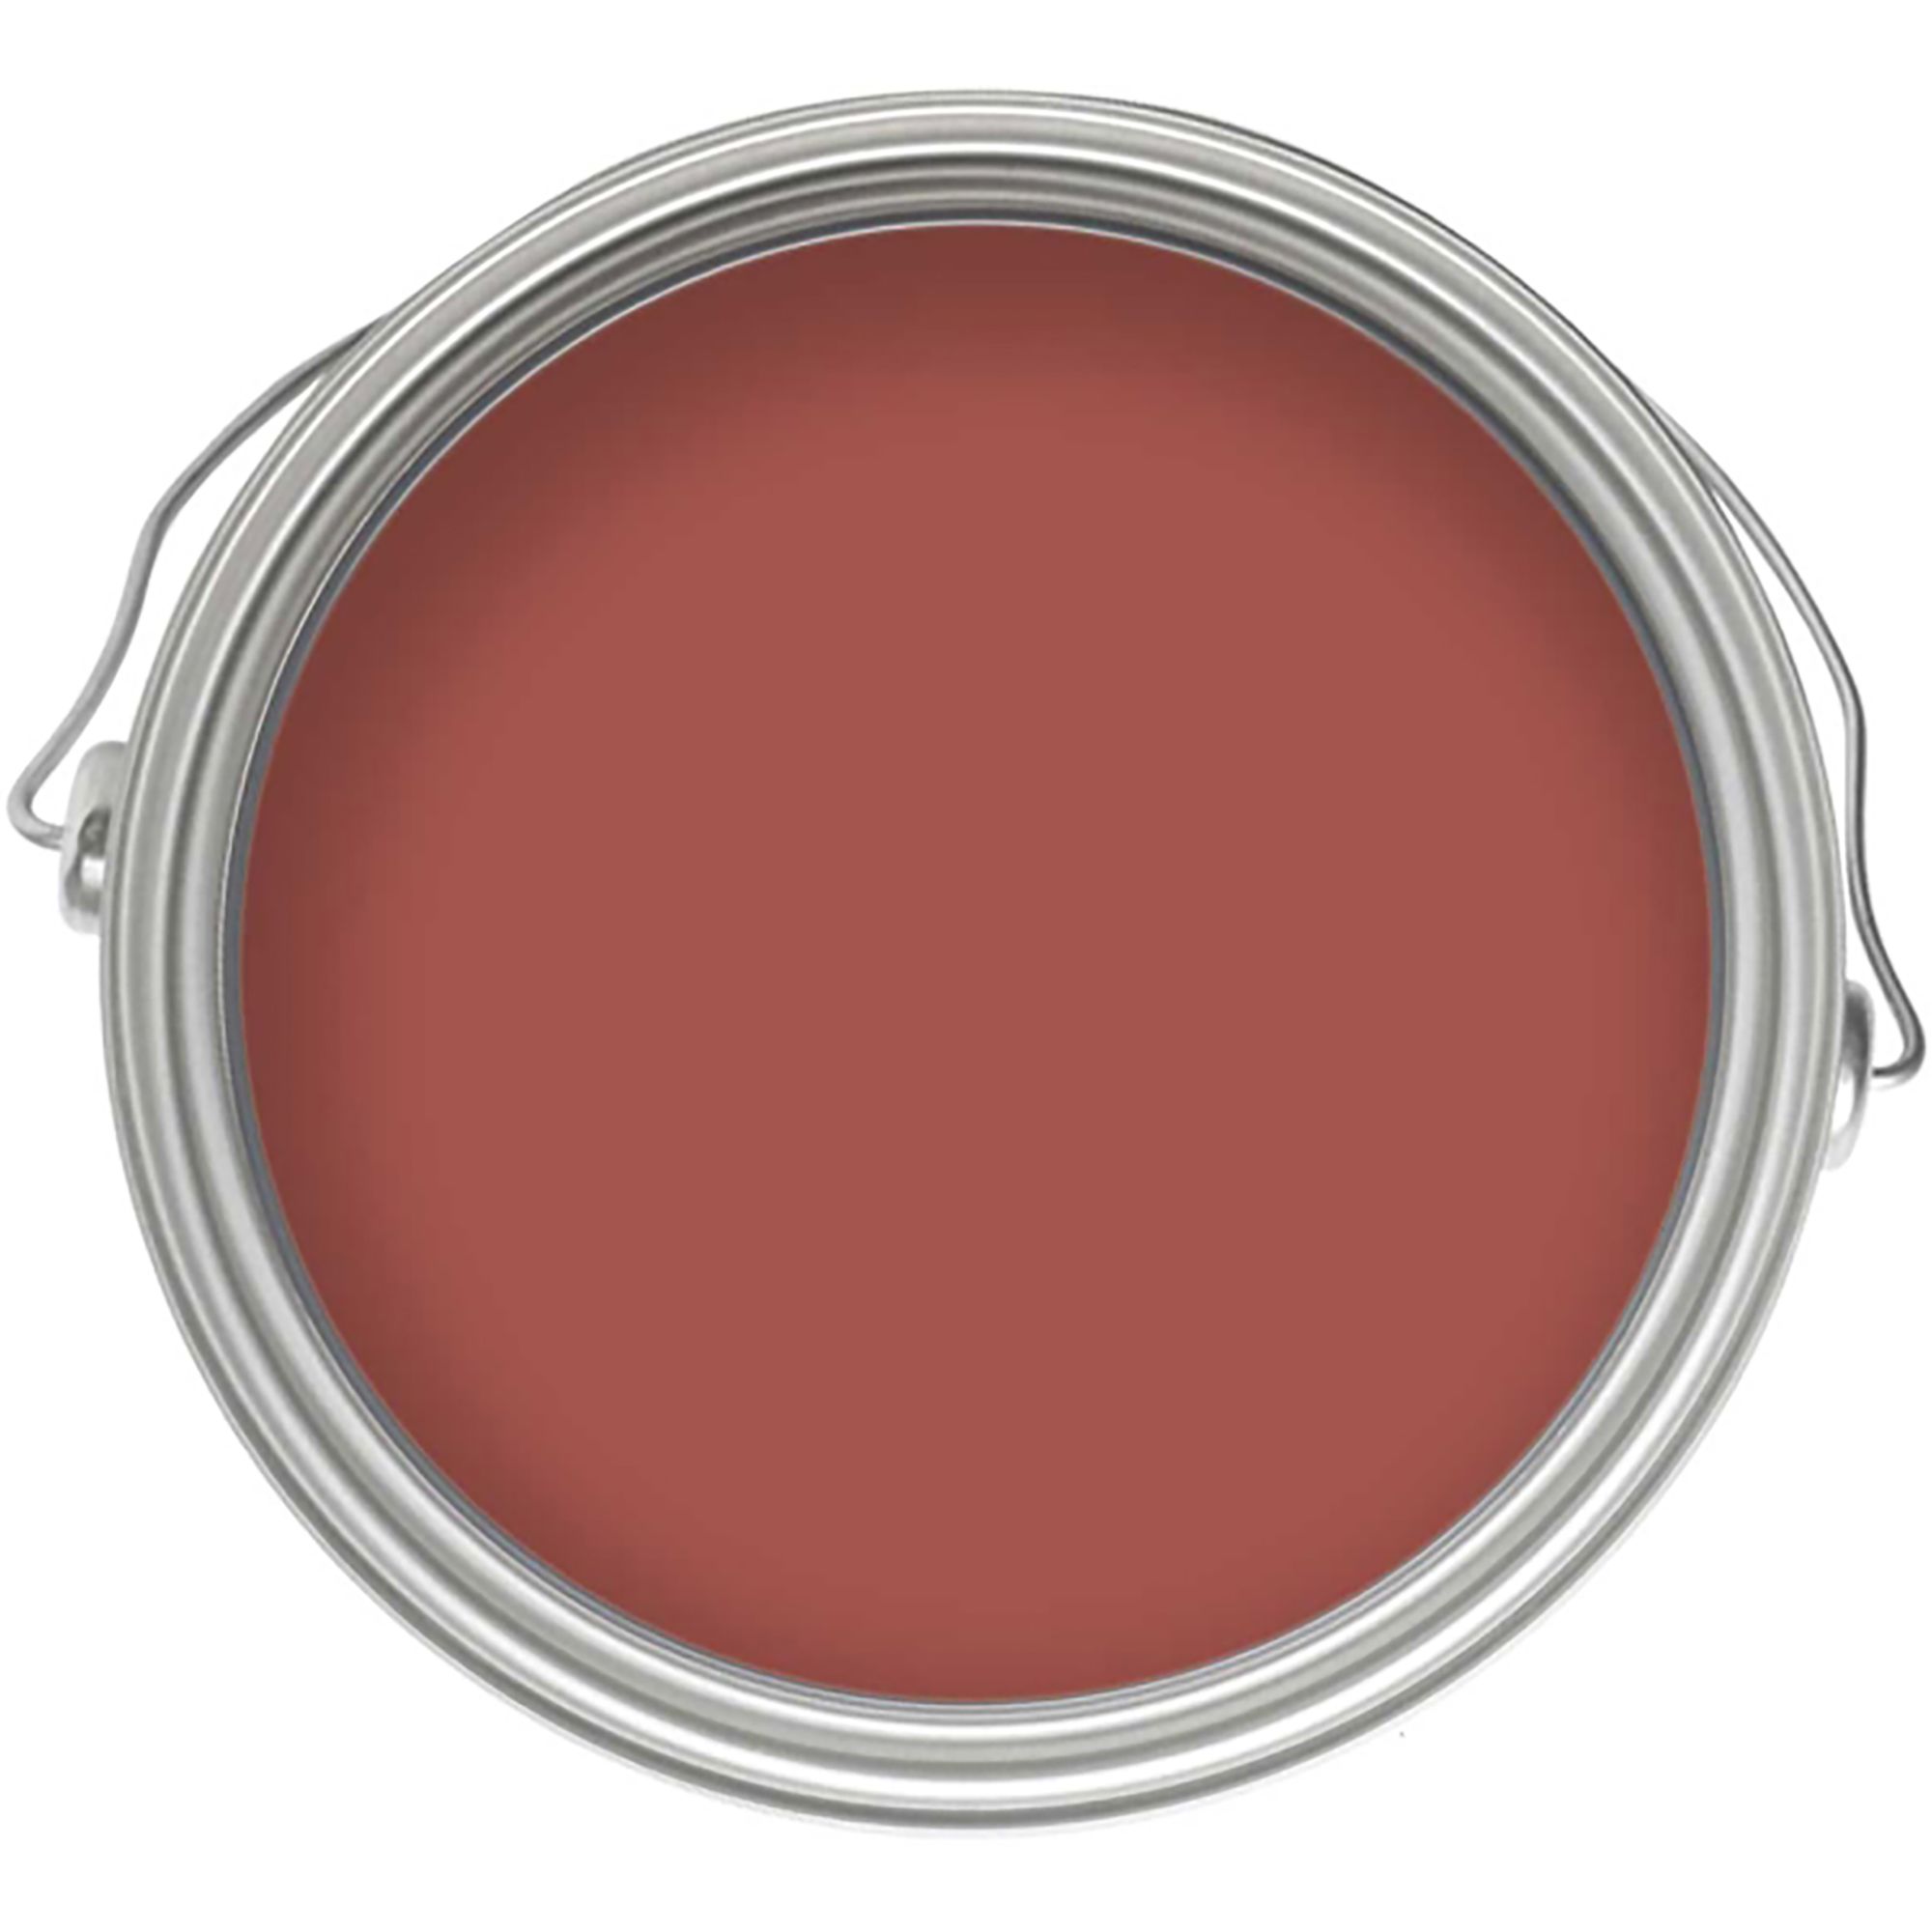 Craig & Rose 1829 Red Barn Chalky Emulsion paint, 2.5L